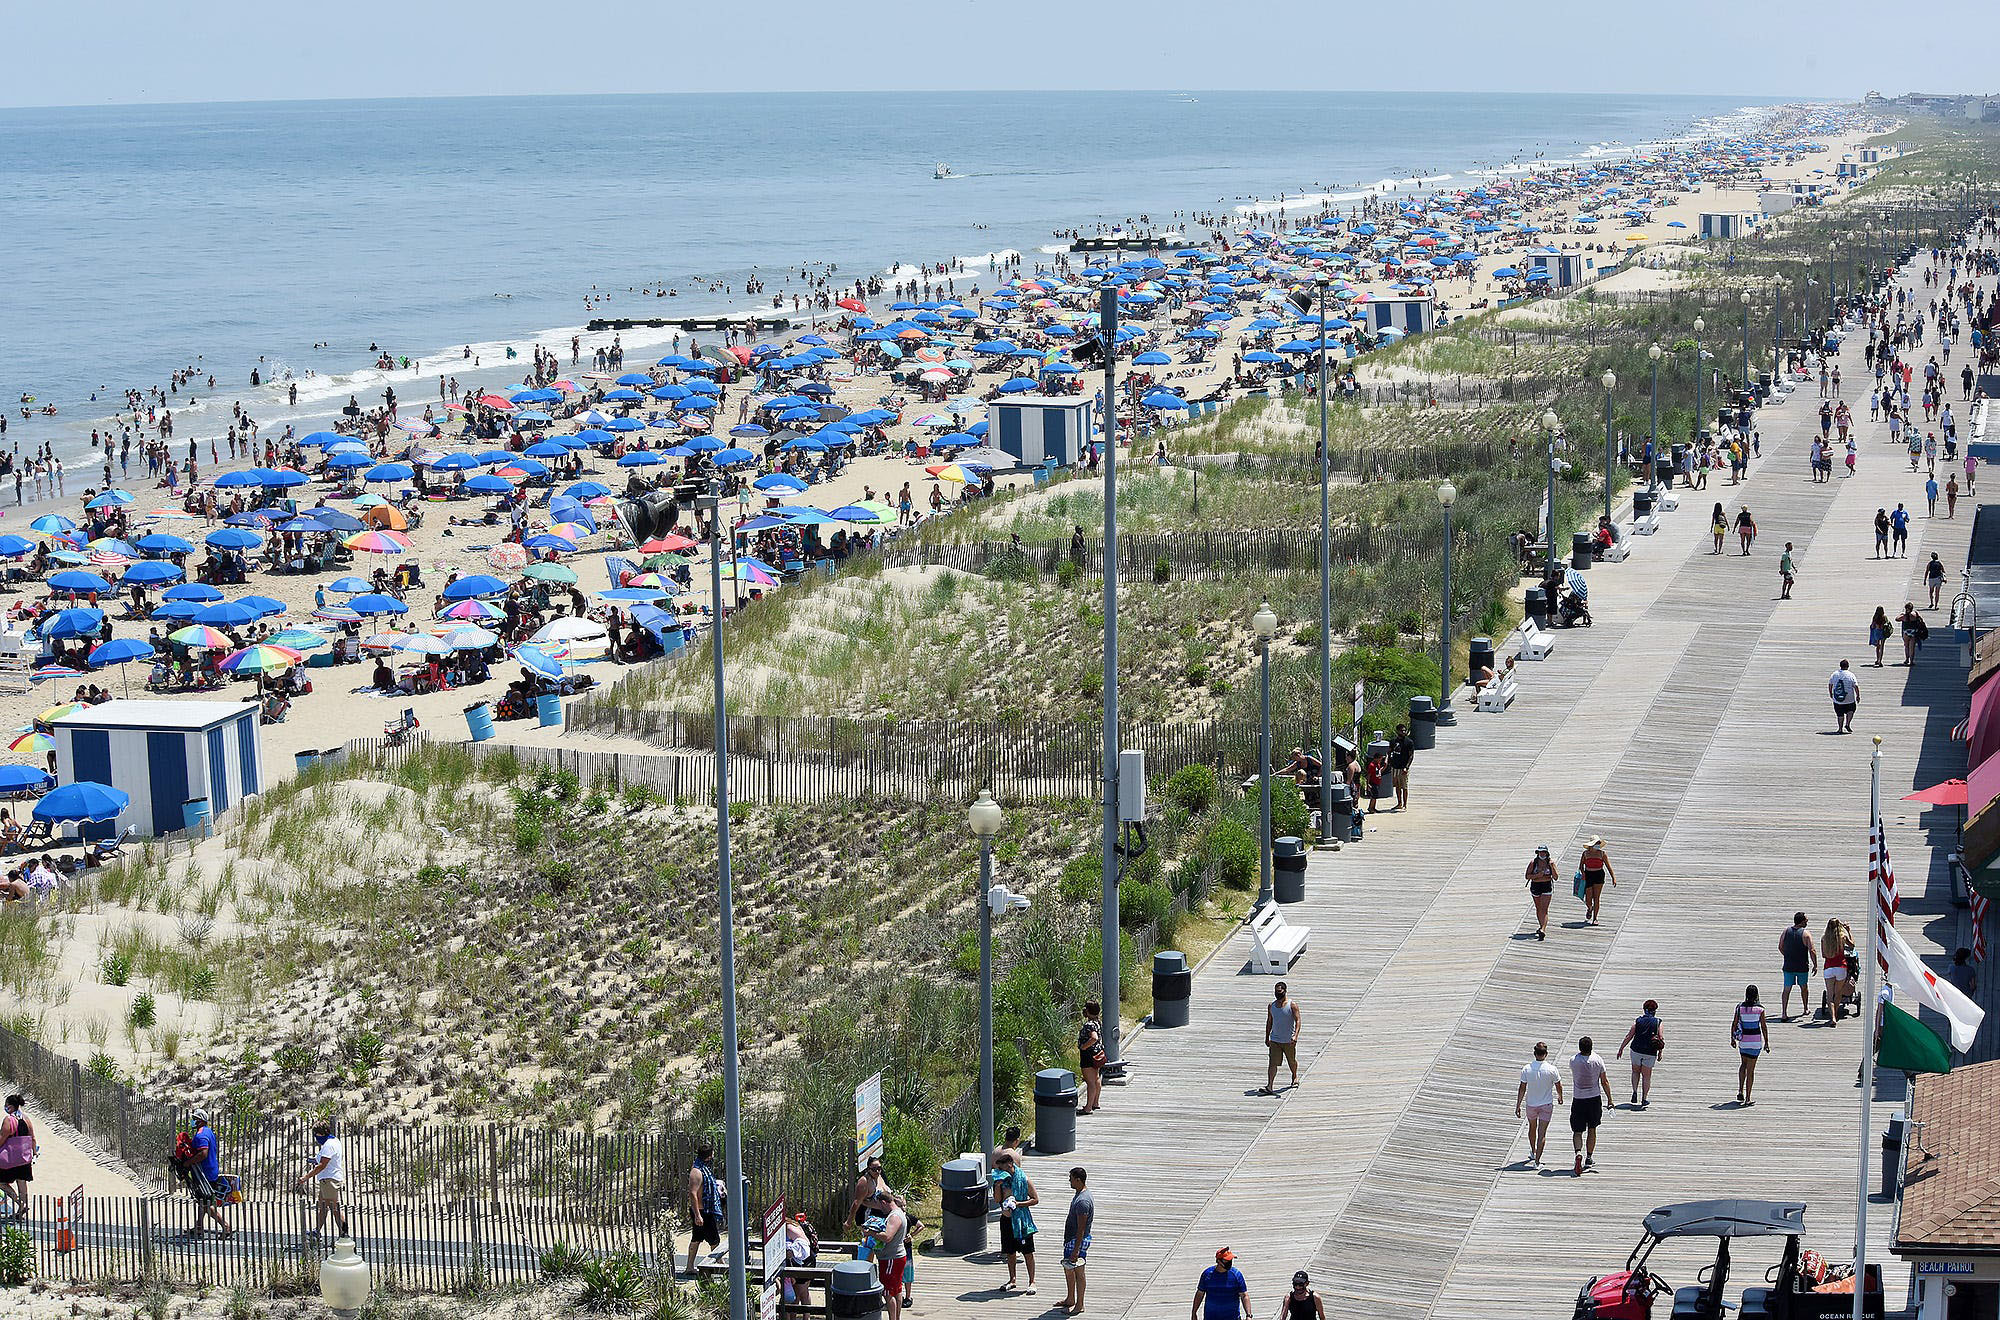 PHOTO: Crowds are shown on Rehoboth Beach in Delaware, July 4, 2020.
